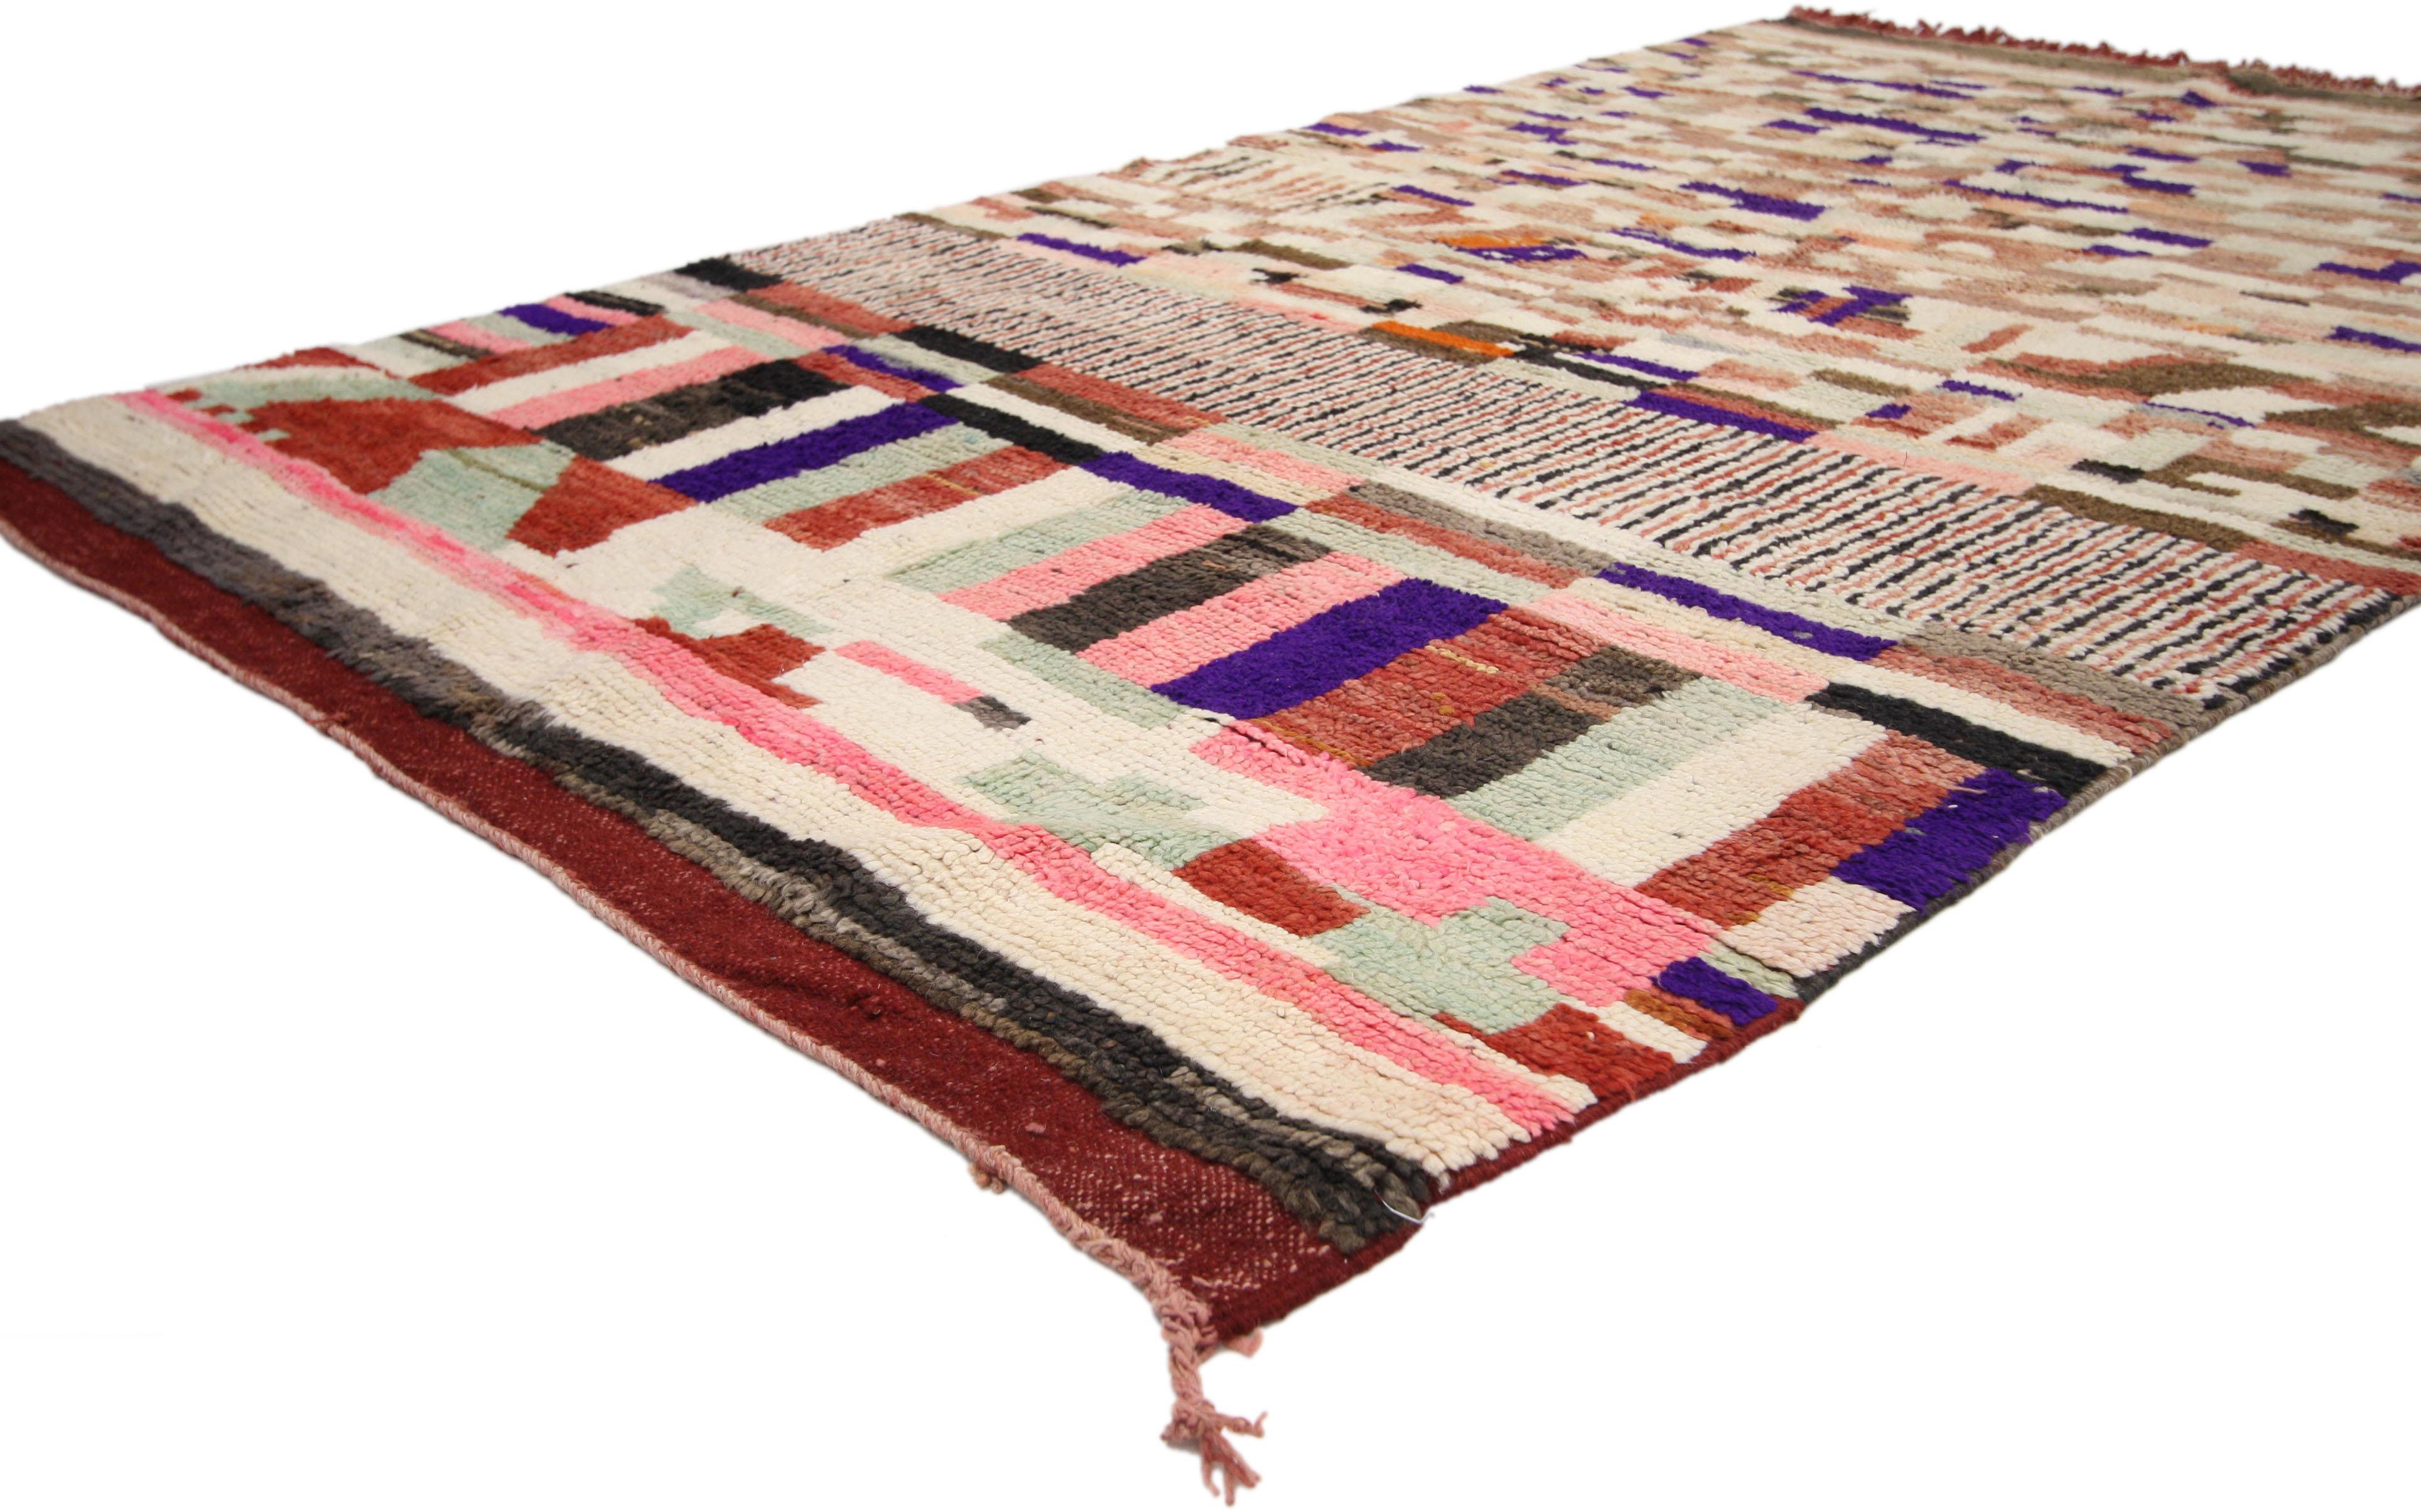 74827, Berber Moroccan Rehamna rug with Bohemian abstract expressionist style. This hand knotted wool Rehamna Moroccan rug features an asymmetrical design and bohemian expressionist style composed of geometric shapes. The different colors unite to